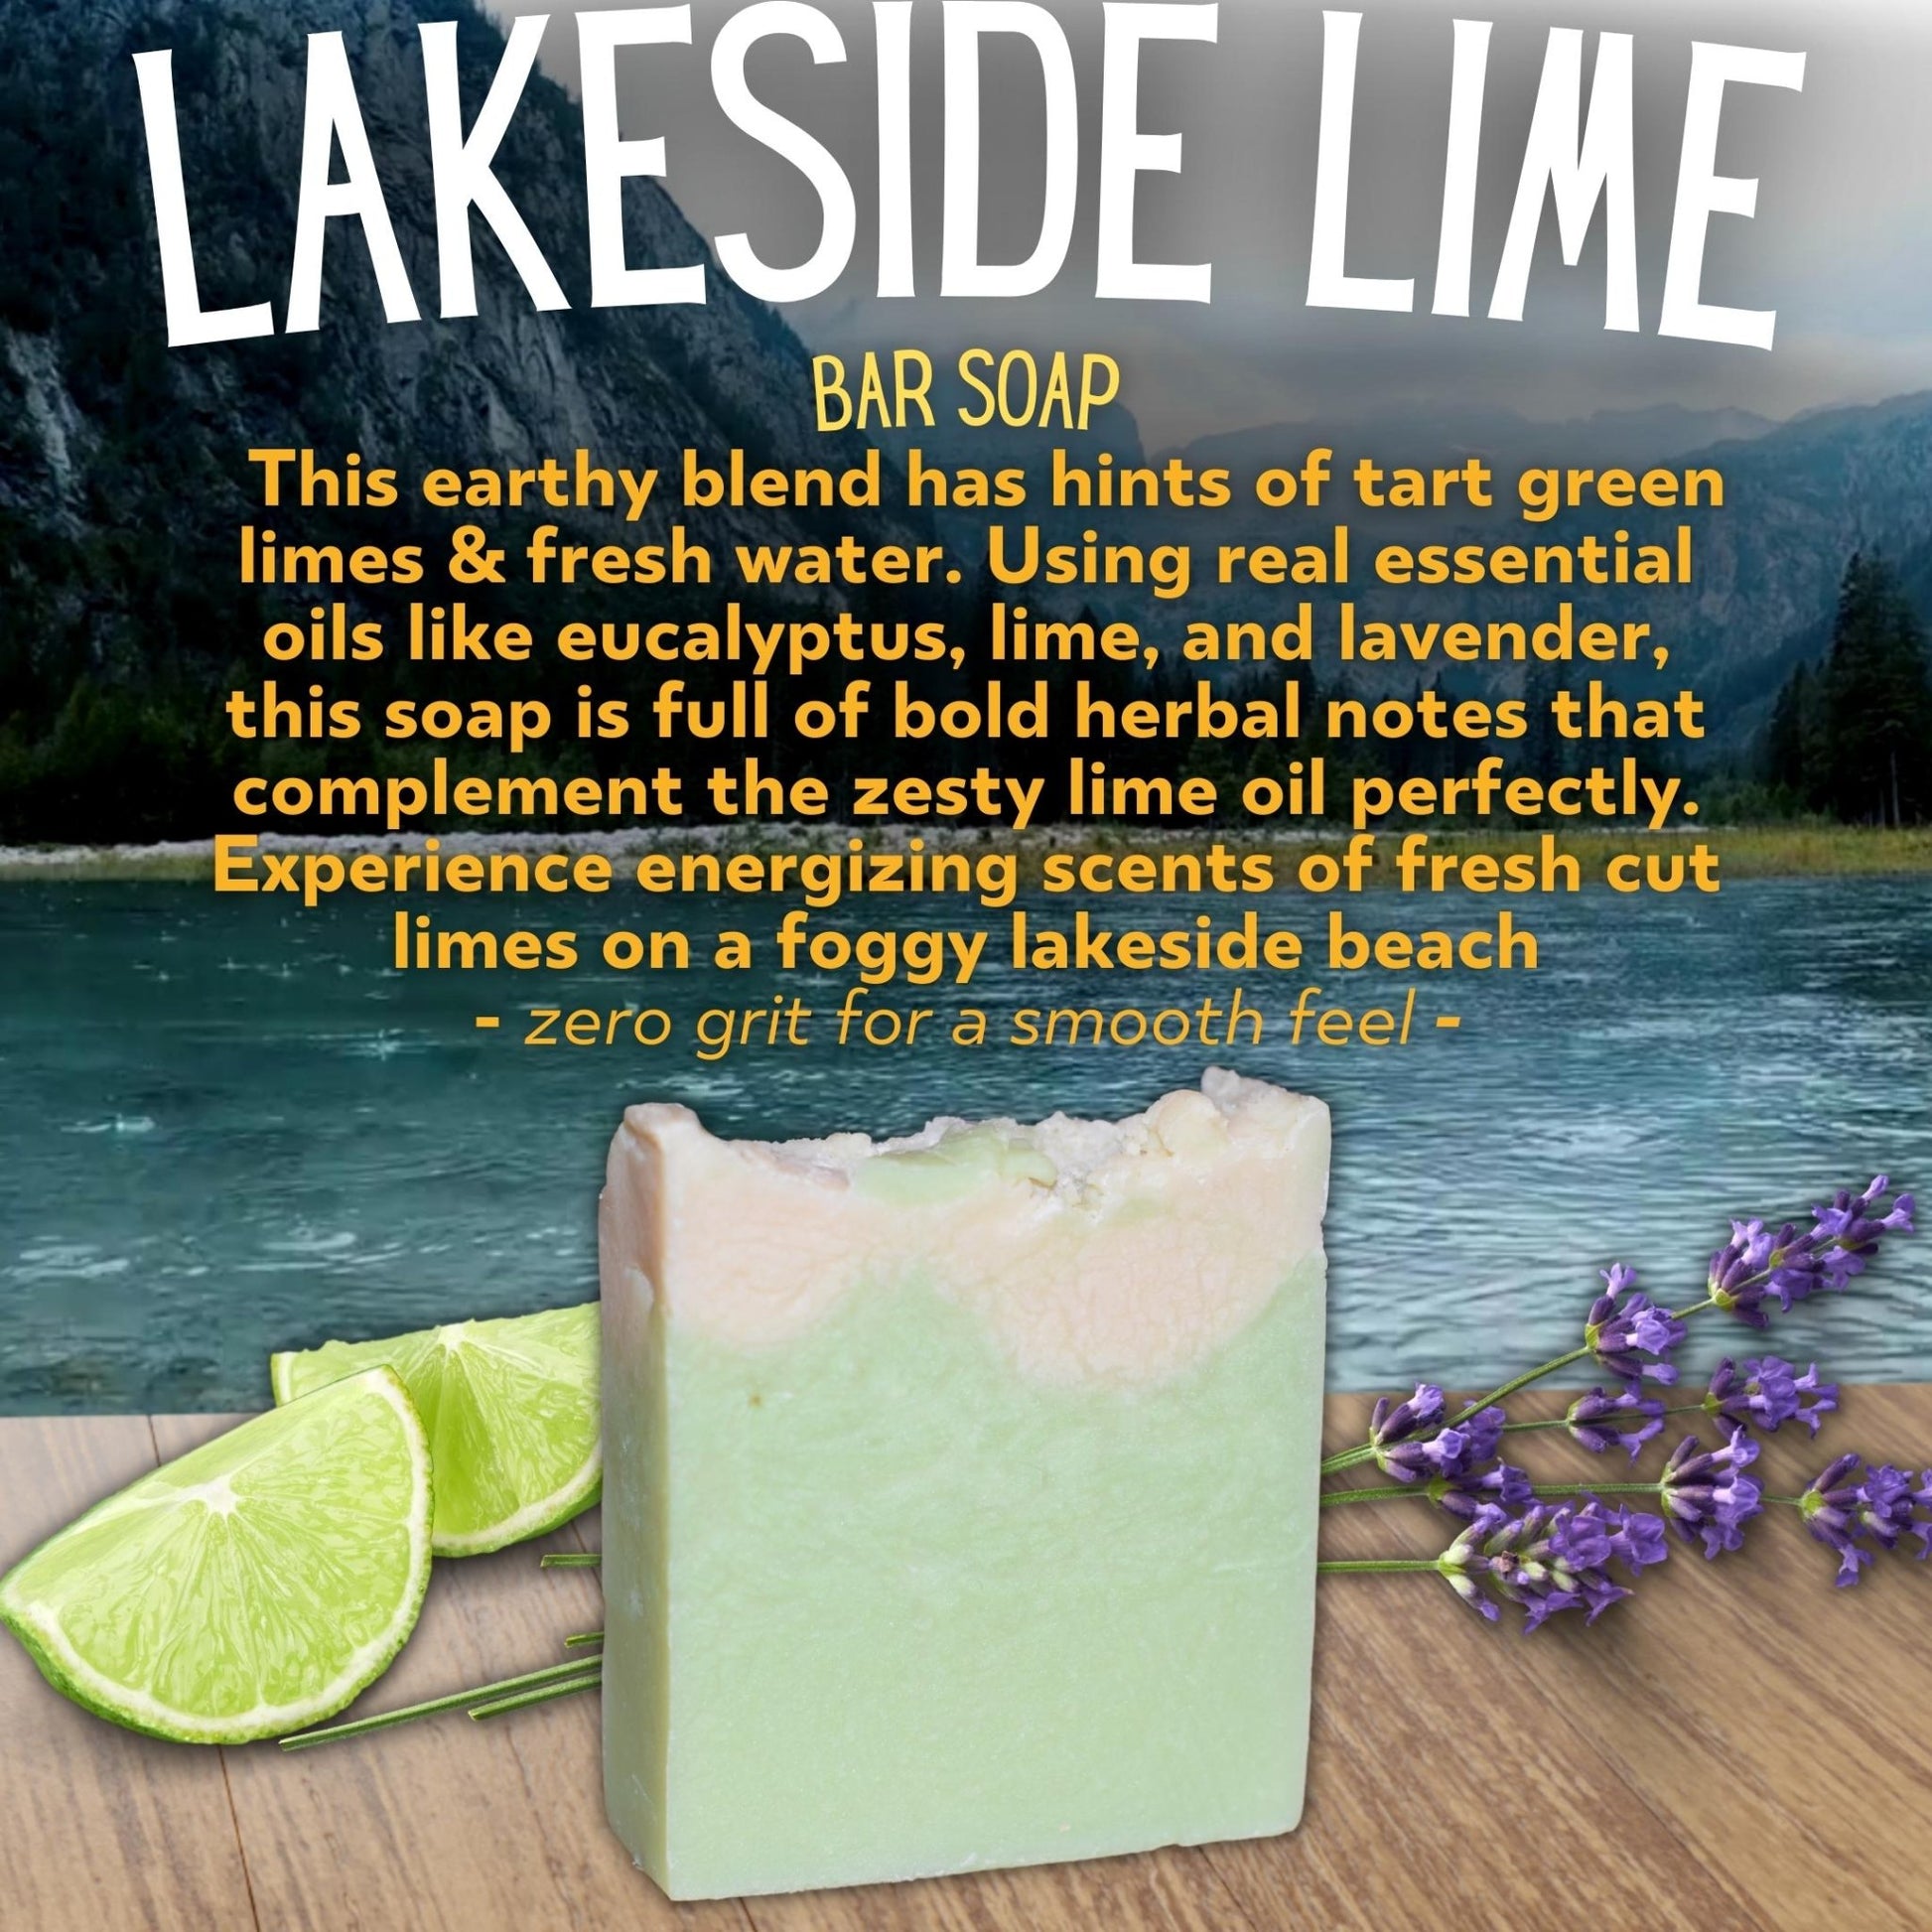 Lakeside Lime - BAR SOAP - Zero Grit - Grizzly Naturals Soap Company